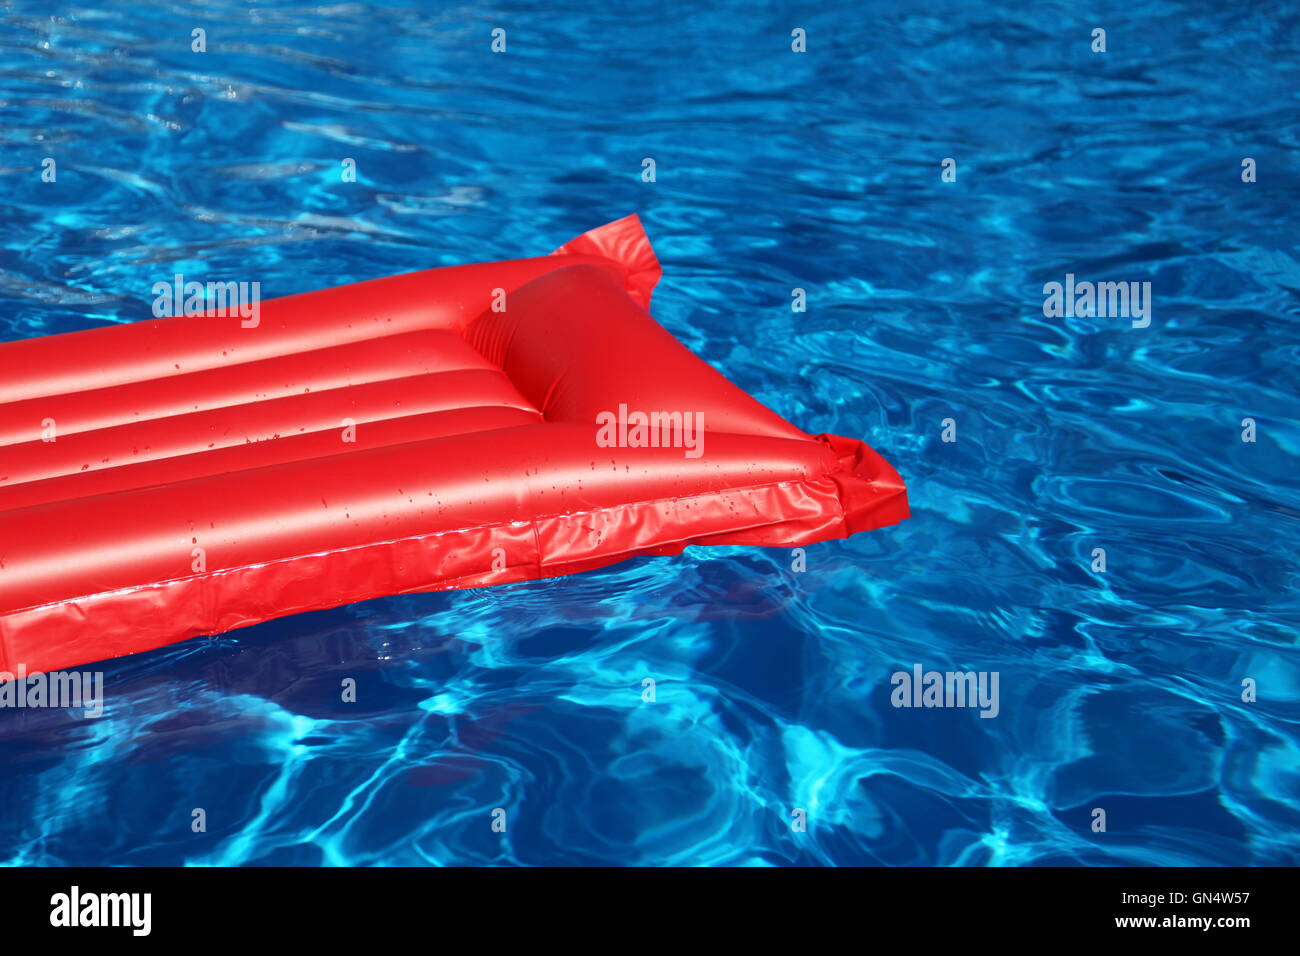 Open-air swimming pool Stock Photo